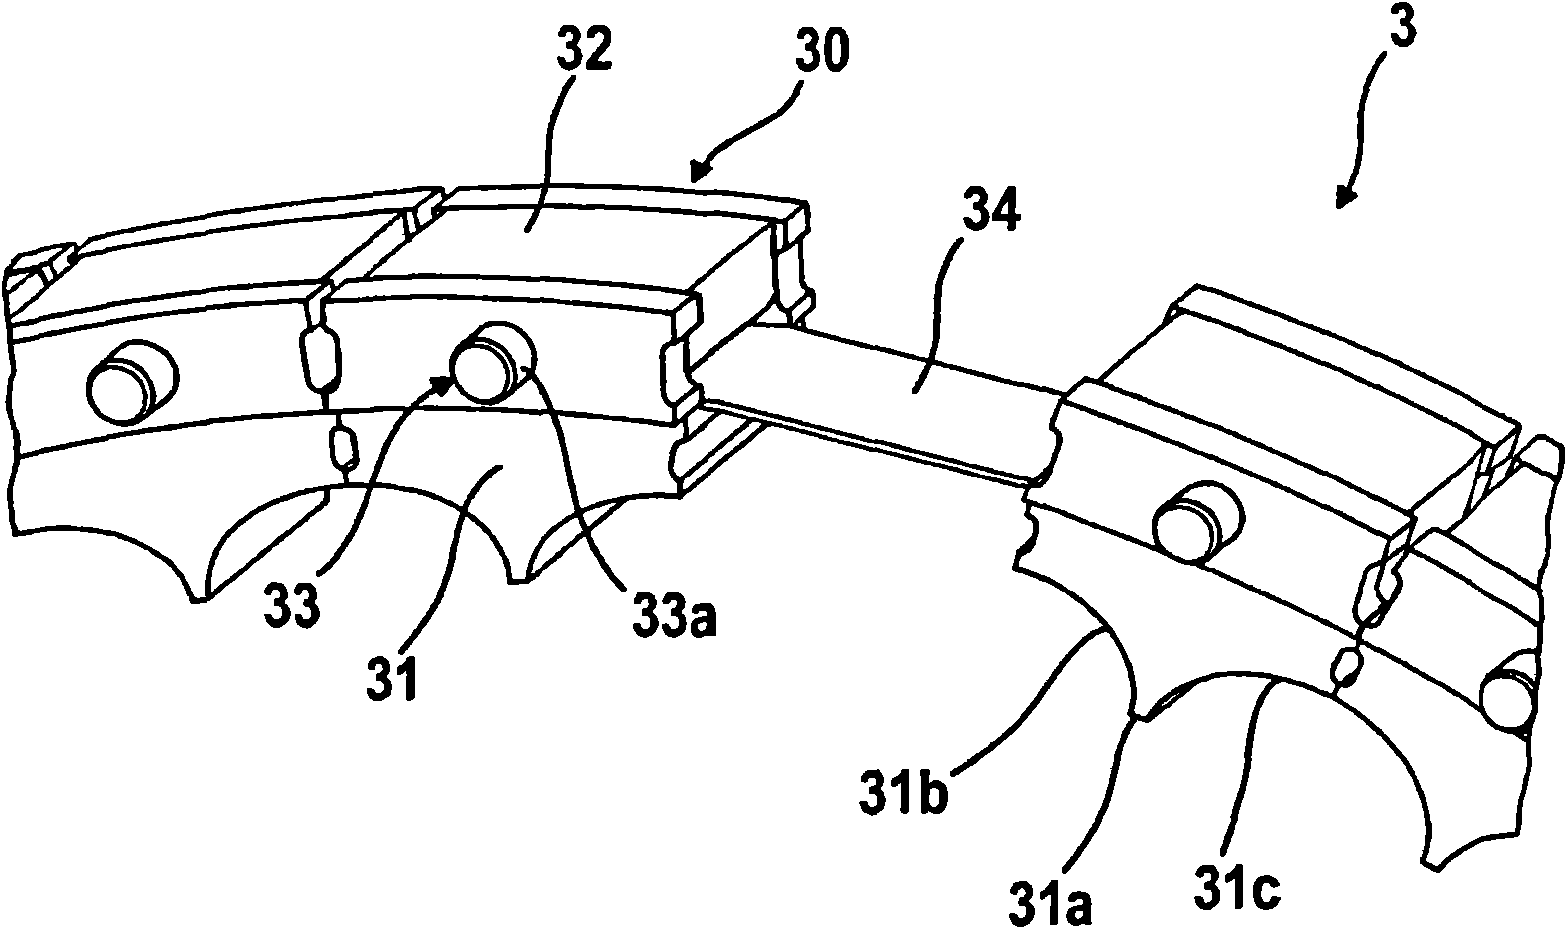 Device for shaping goods that have been produced from a strand of material